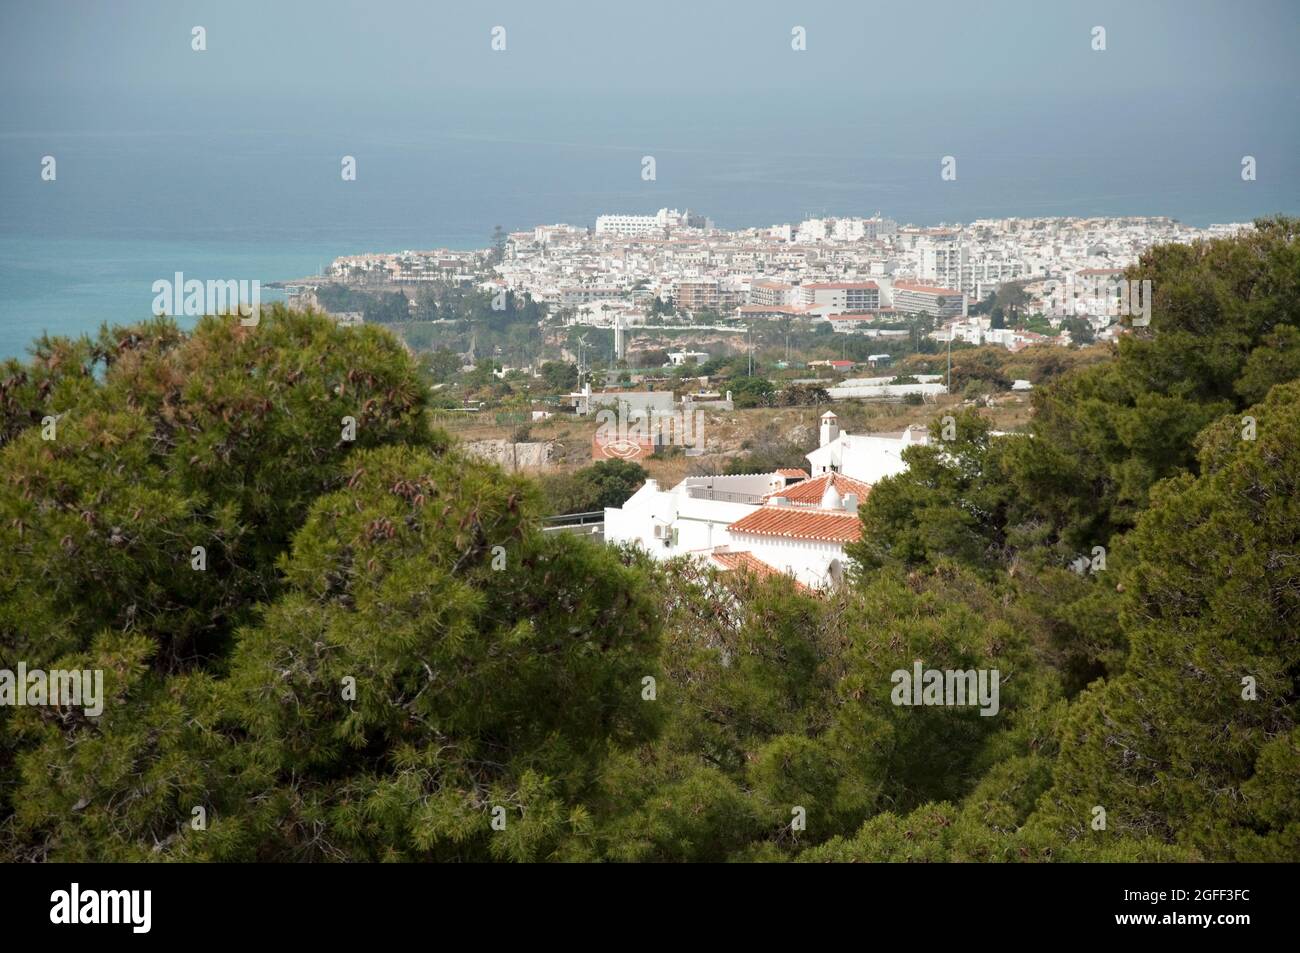 View to Sea from The Nerja Caves, Nerja, Costa del Sol, Province of Malaga, Andalucia, Spain Stock Photo